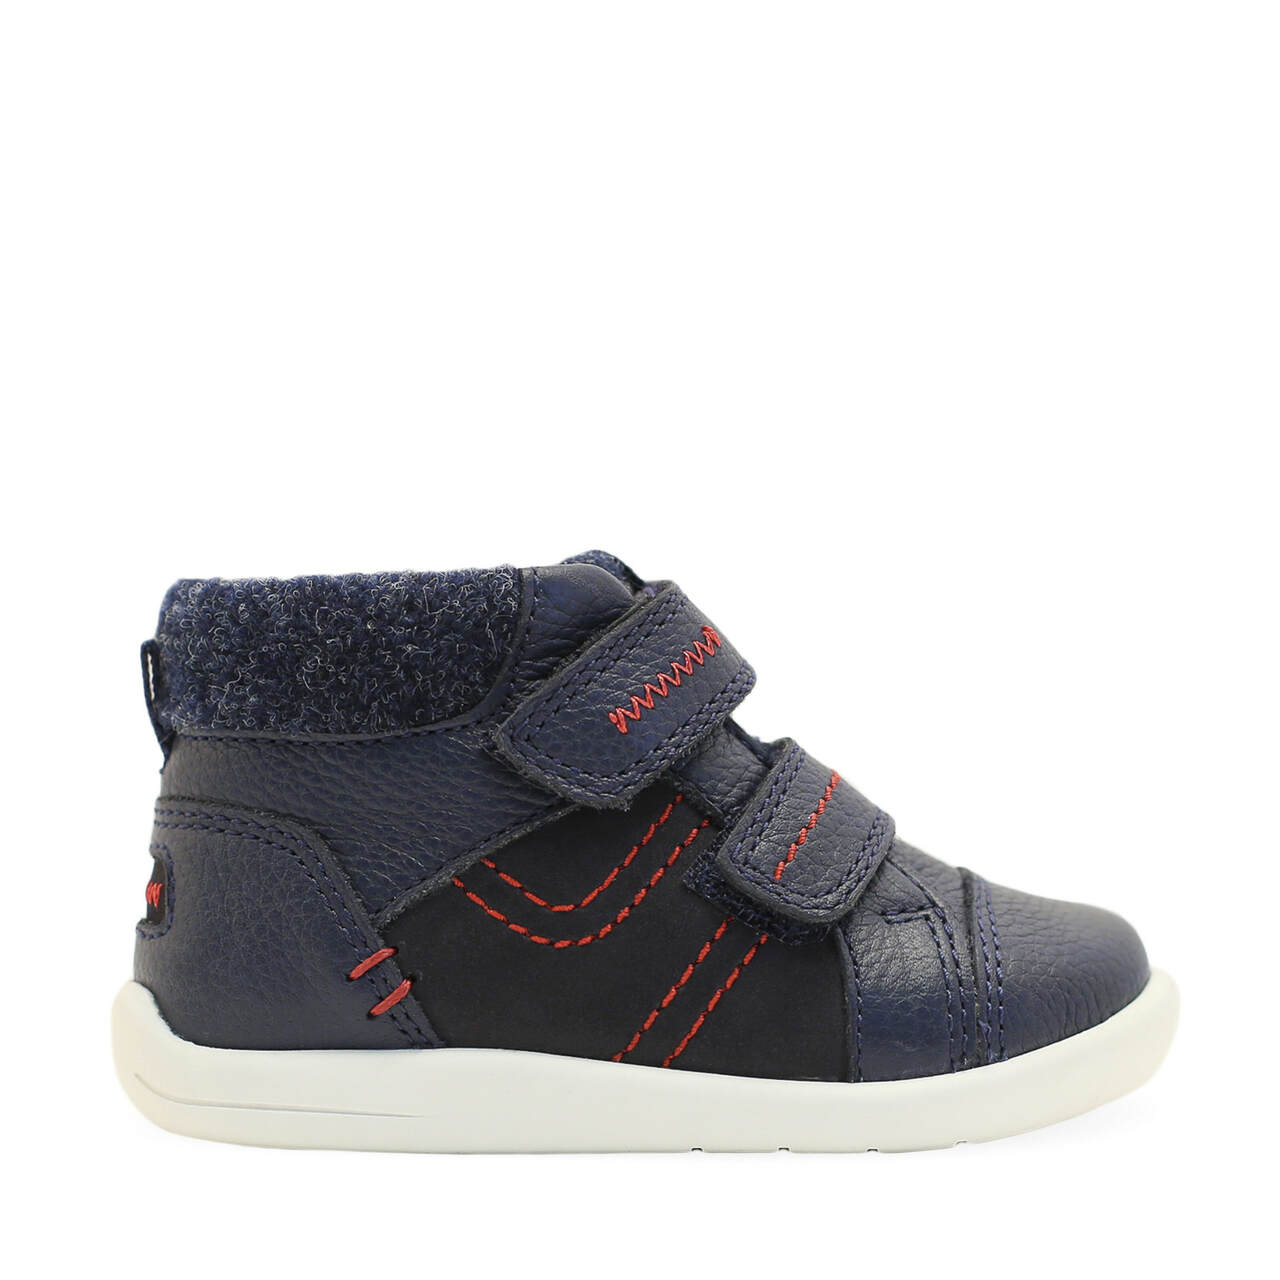 StartRite Adventure 0791_9 Boys Navy Leather Touch Fastening Ankle Boots